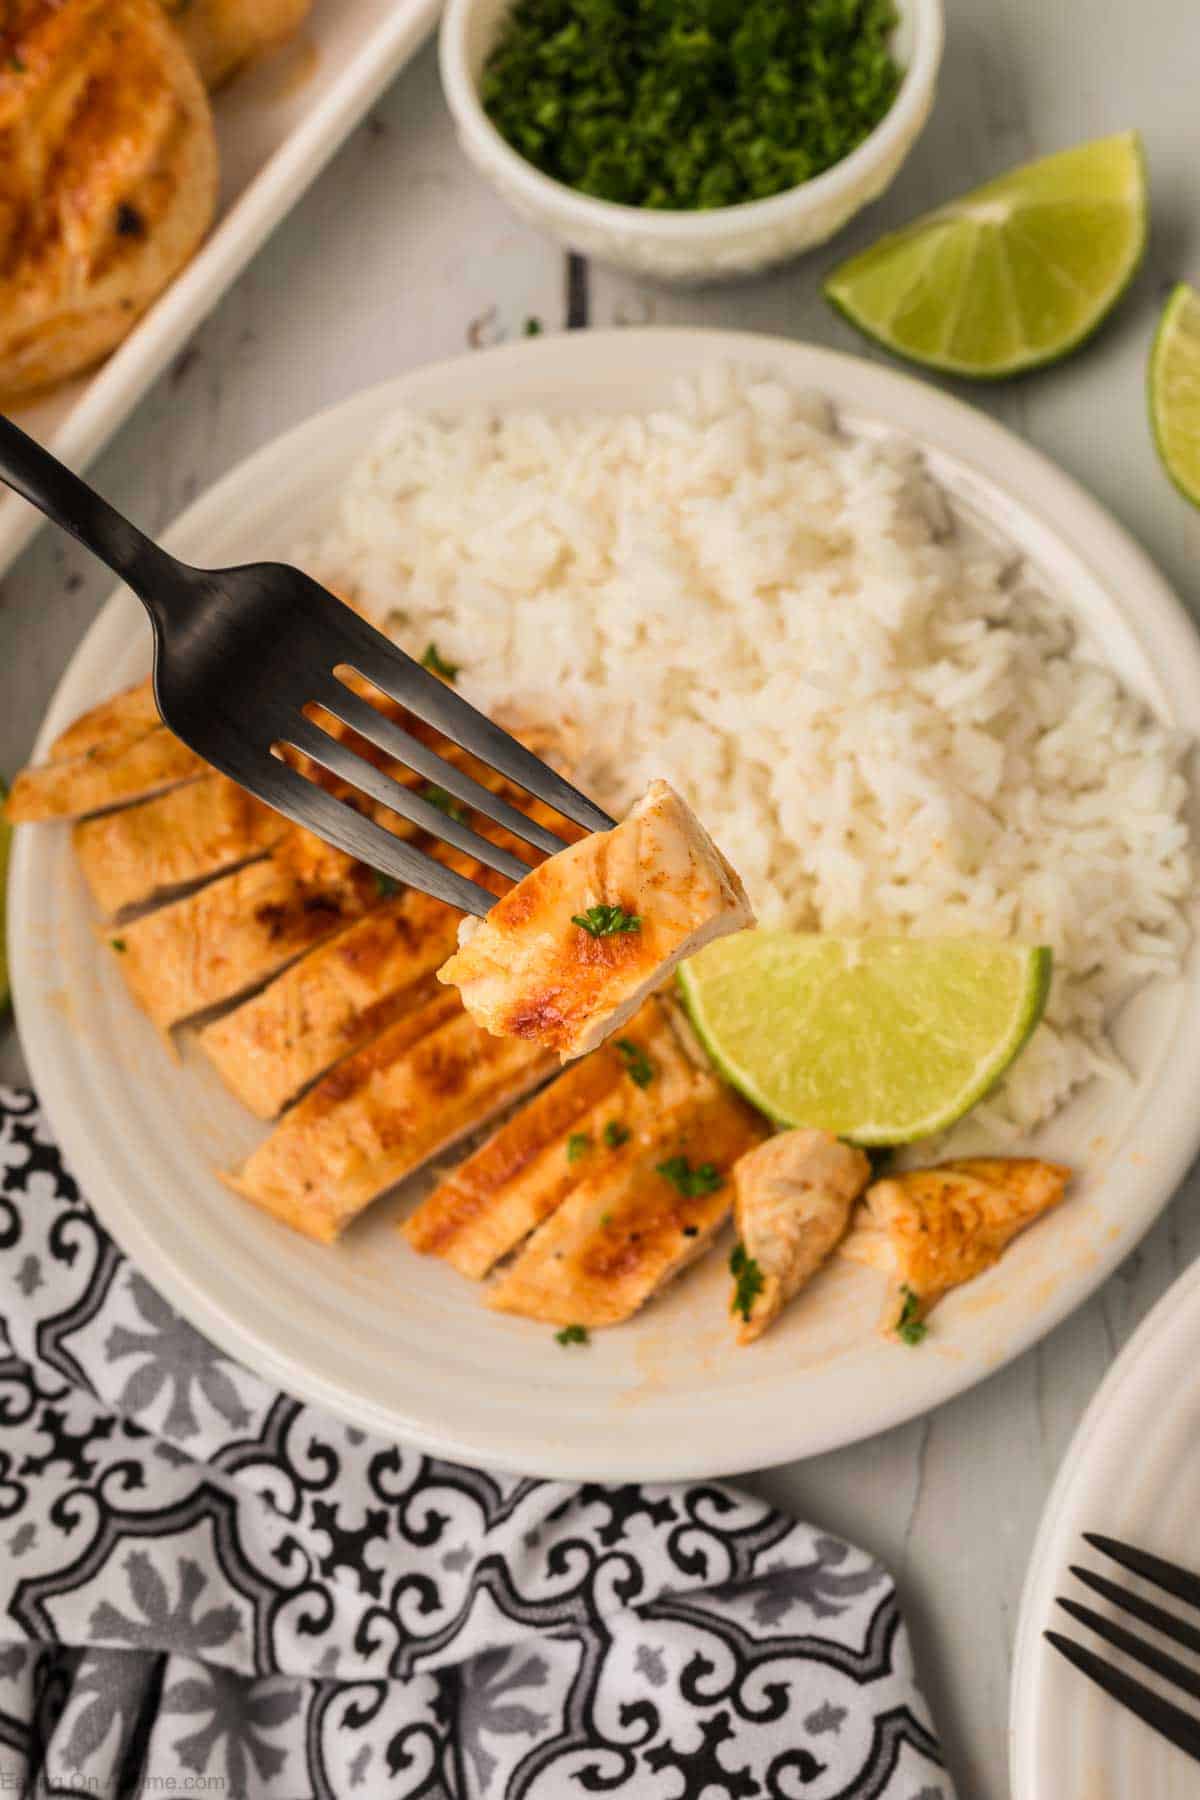 Chicken breast sliced on a plate with a bite on a fork and white rice on the plate